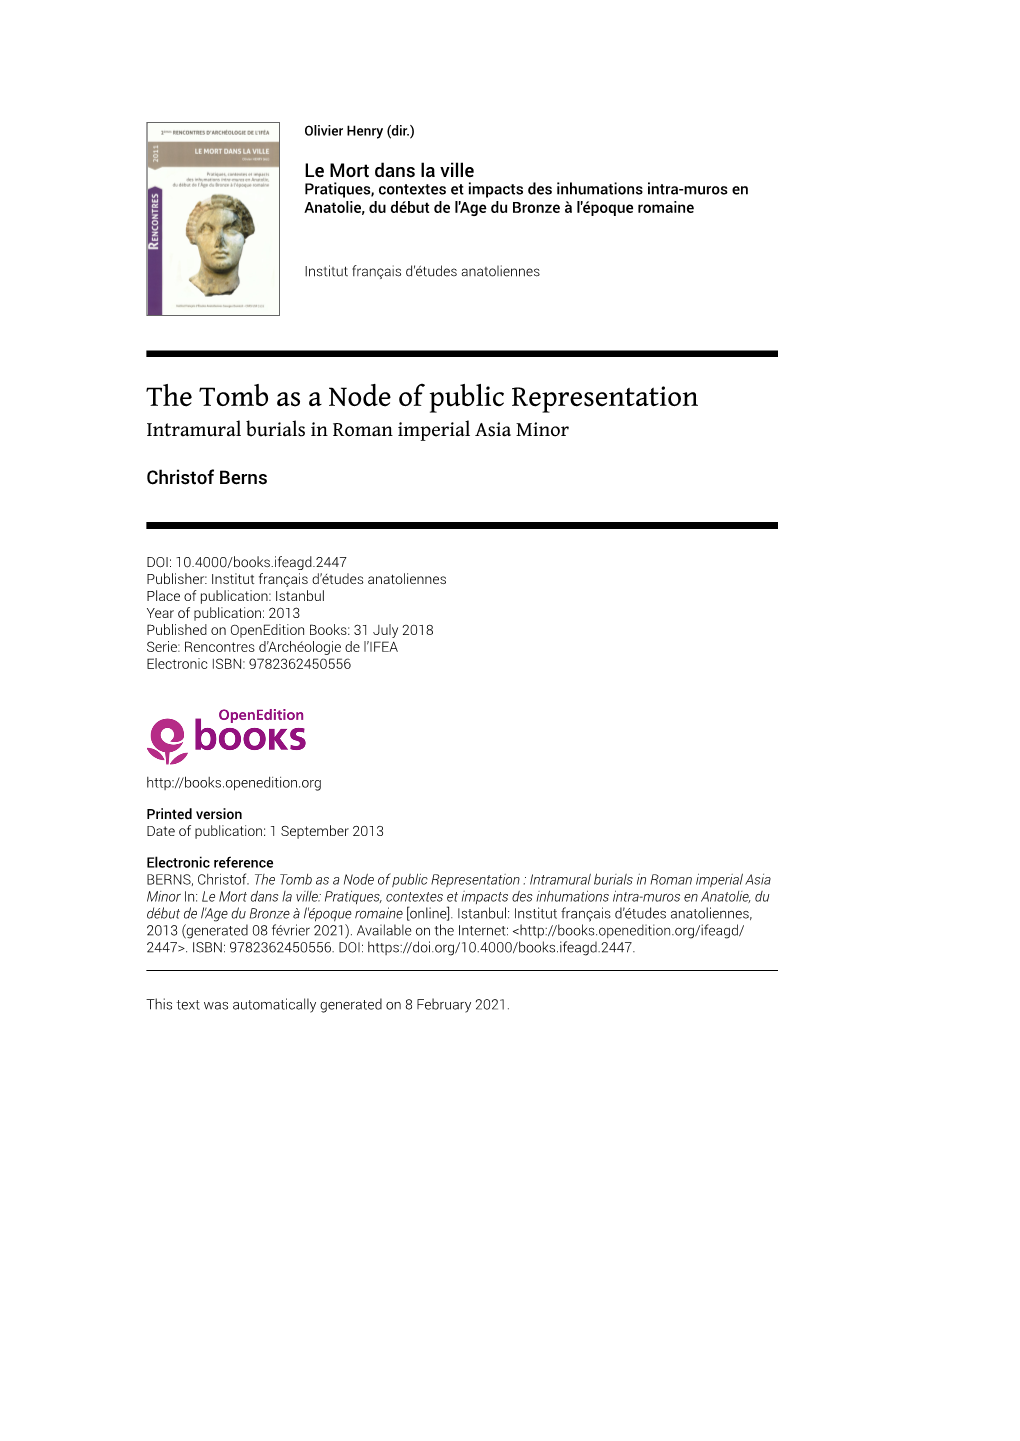 The Tomb As a Node of Public Representation Intramural Burials in Roman Imperial Asia Minor